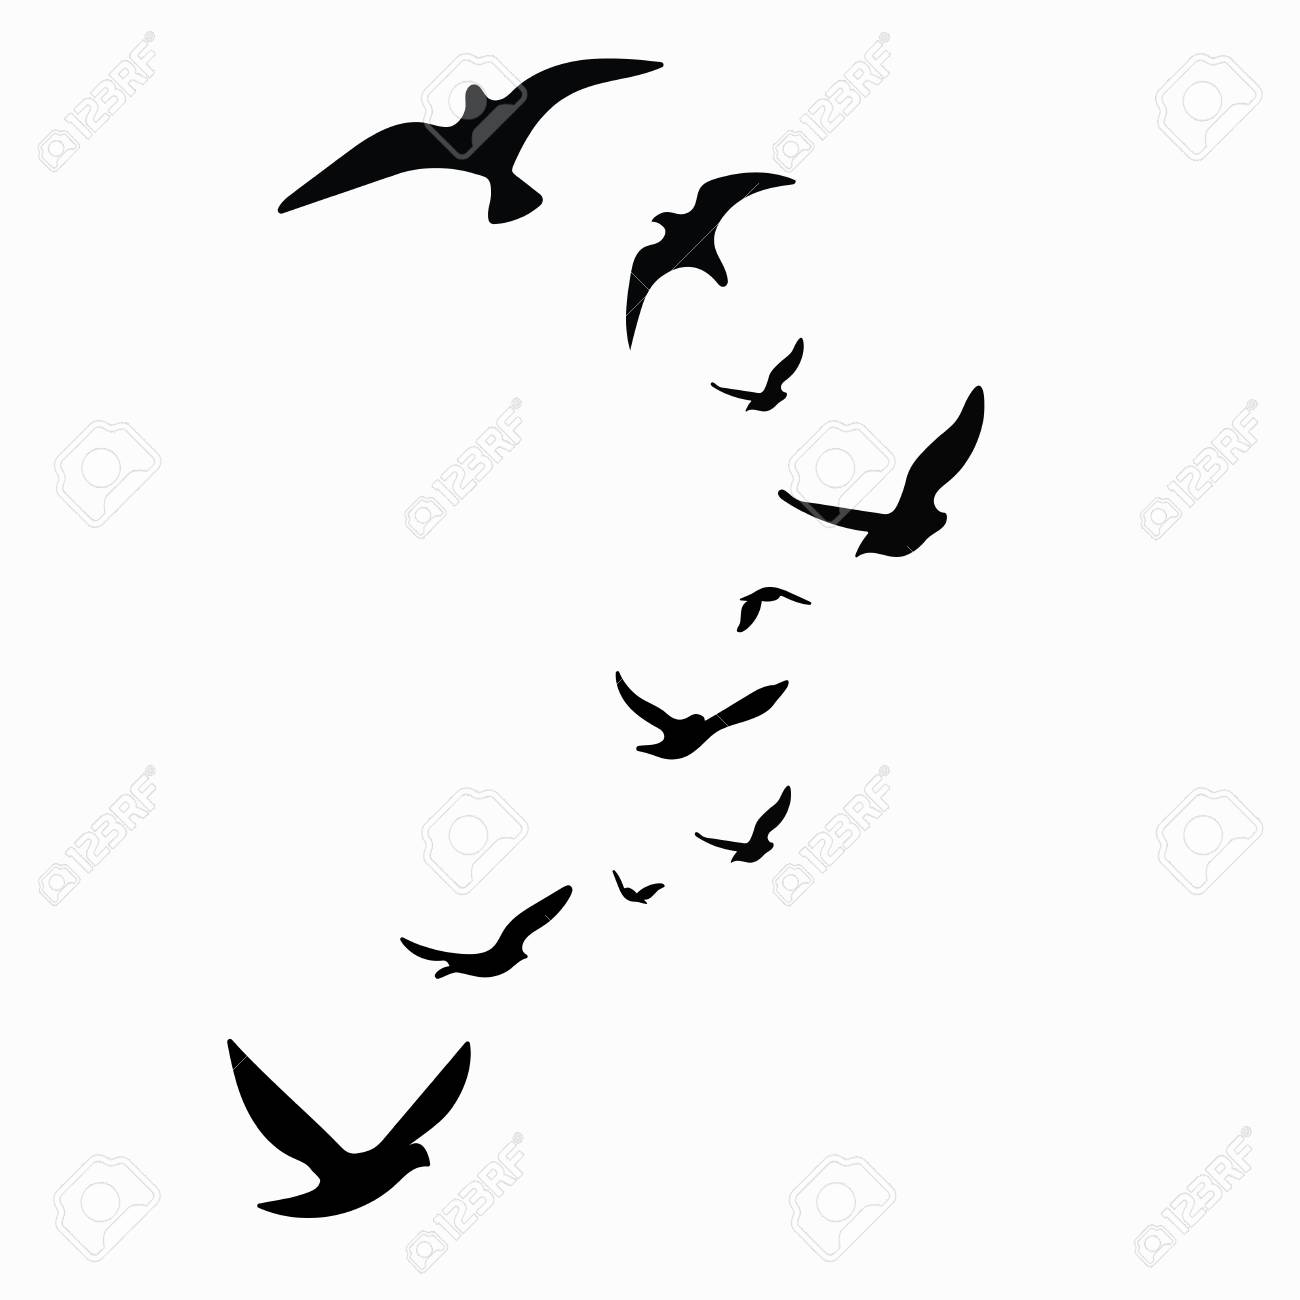 Silhouette Of A Flock Of Birds Black Contours Of Flying Birds with proportions 1300 X 1300